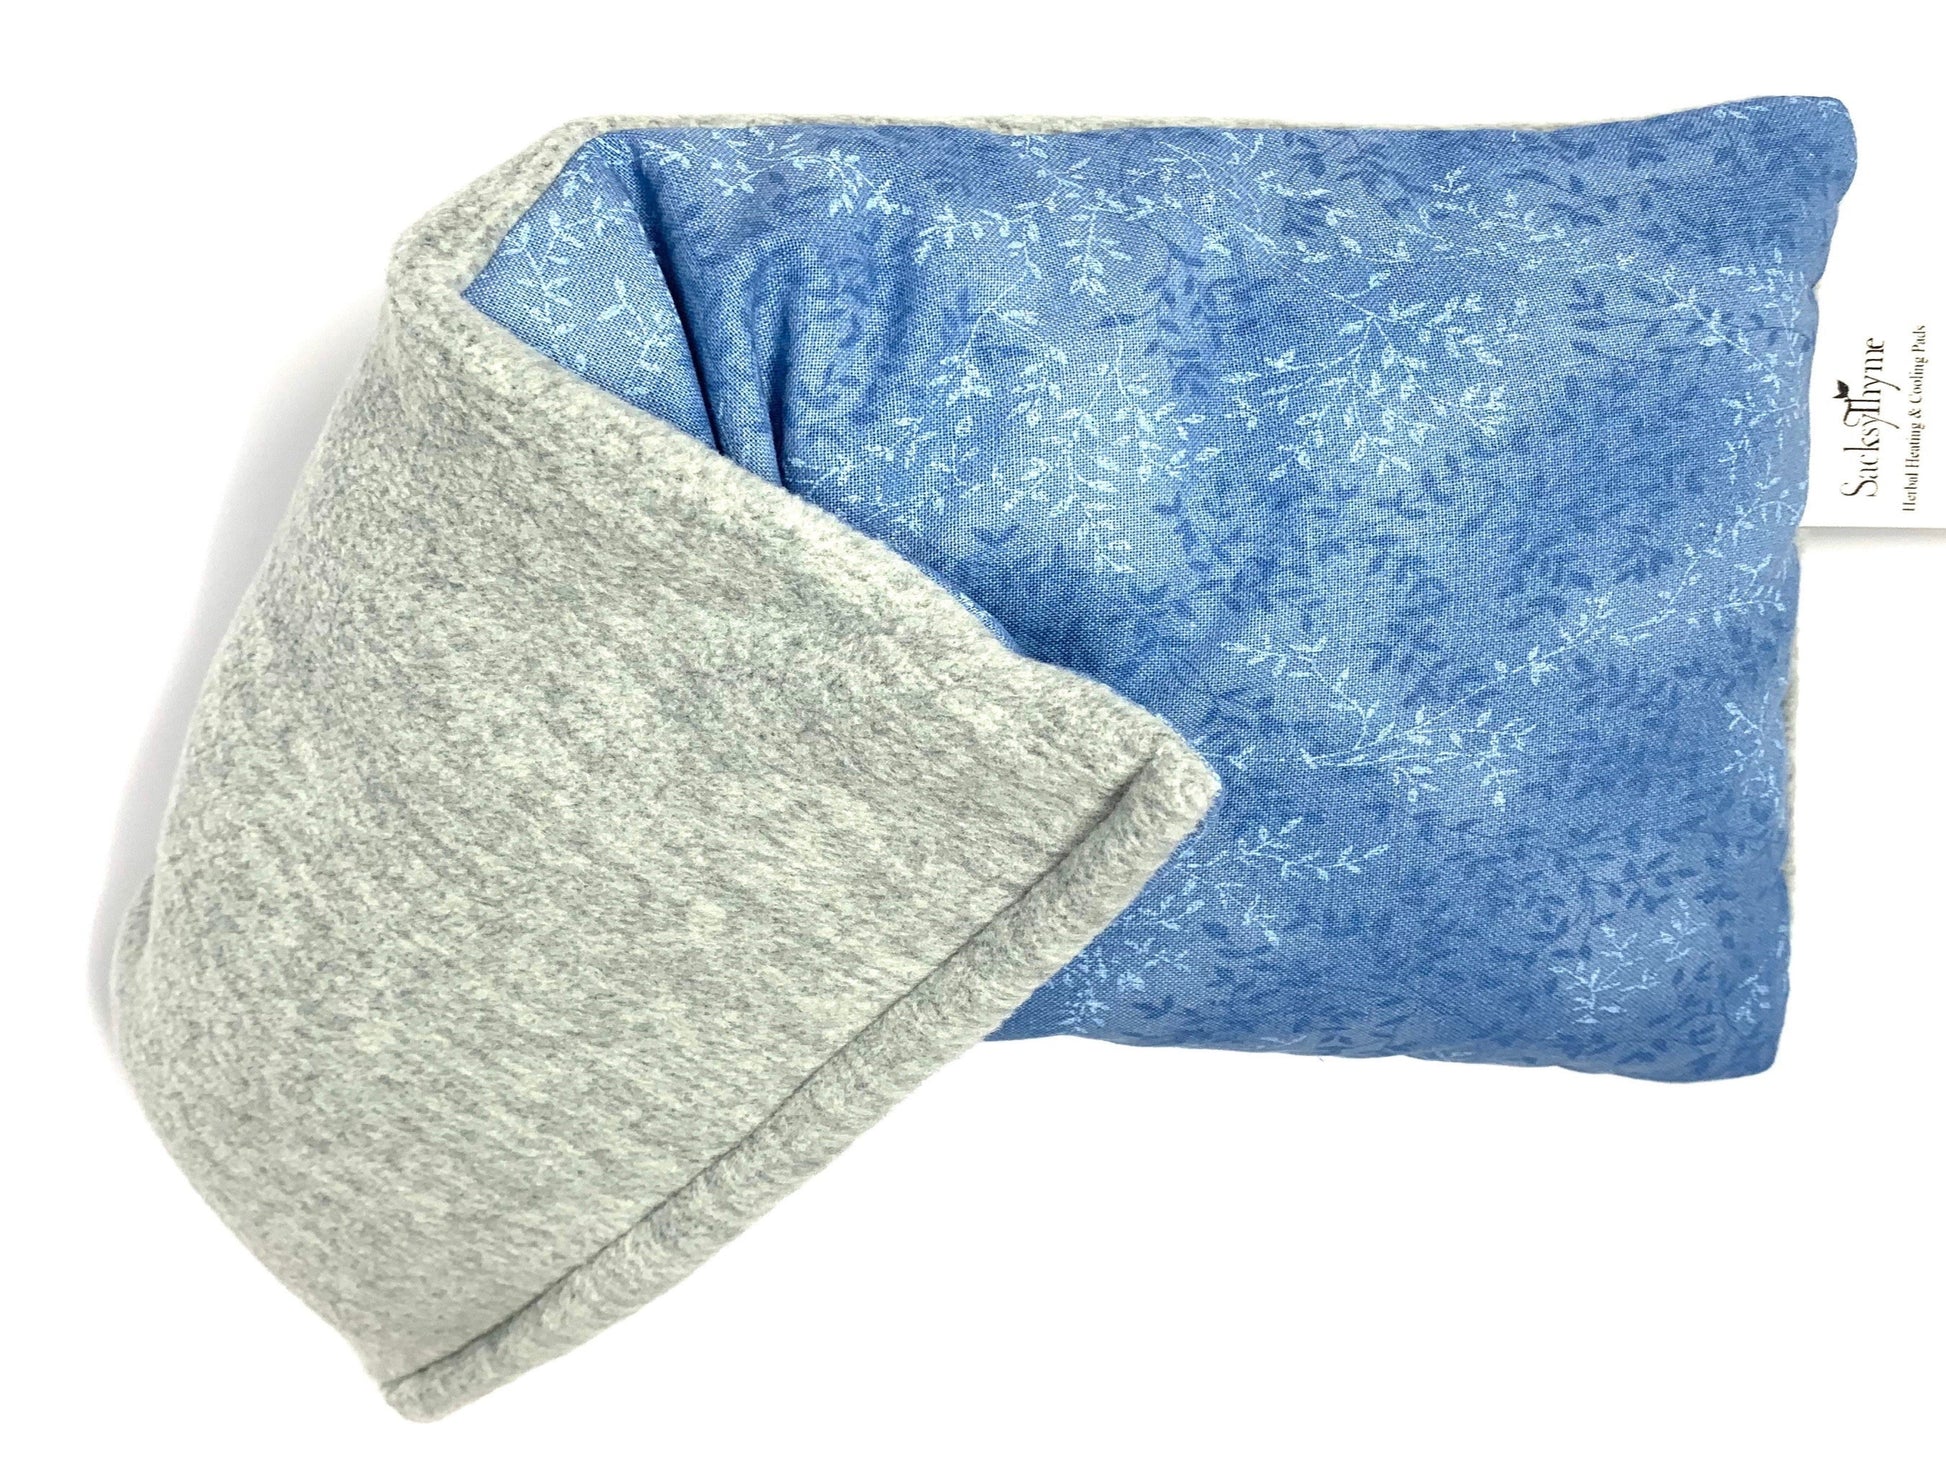 Hot Therapy Relief Microwavable Heating Pad, 12" x 7"